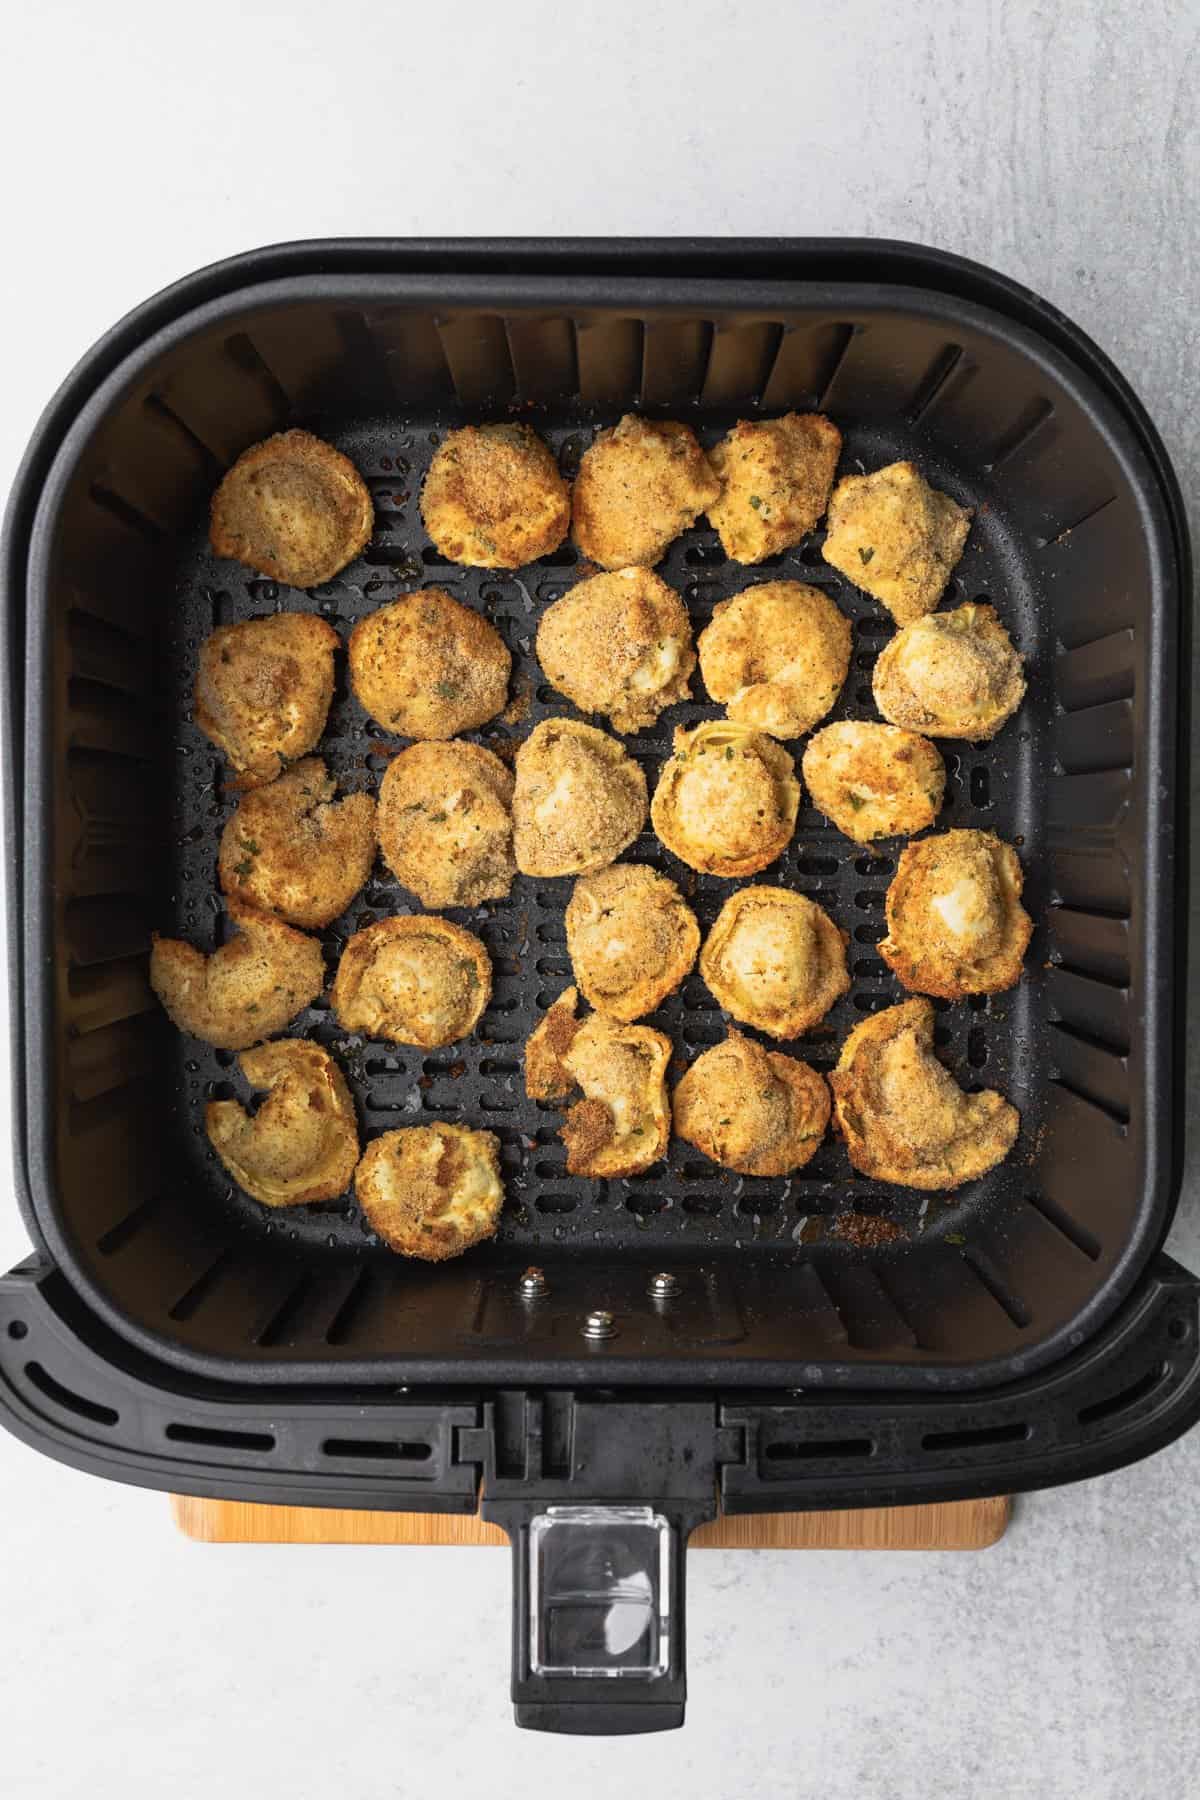 air fryer basket with partially cooked tortellini